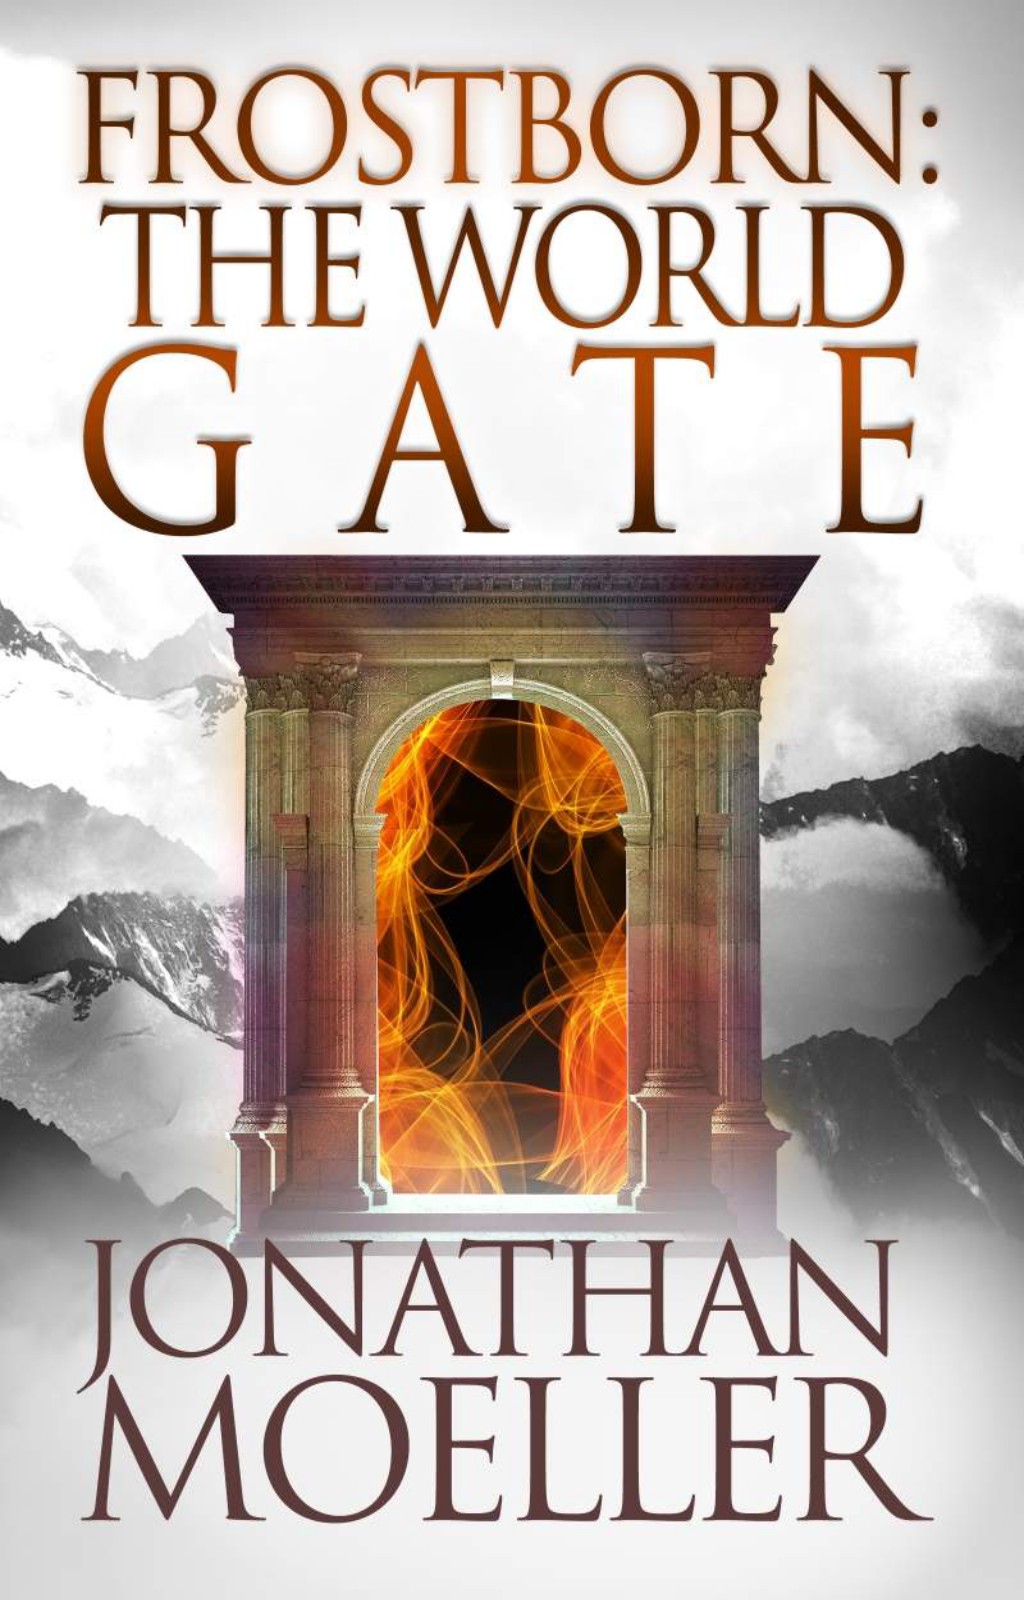 Frostborn: The World Gate by Jonathan Moeller